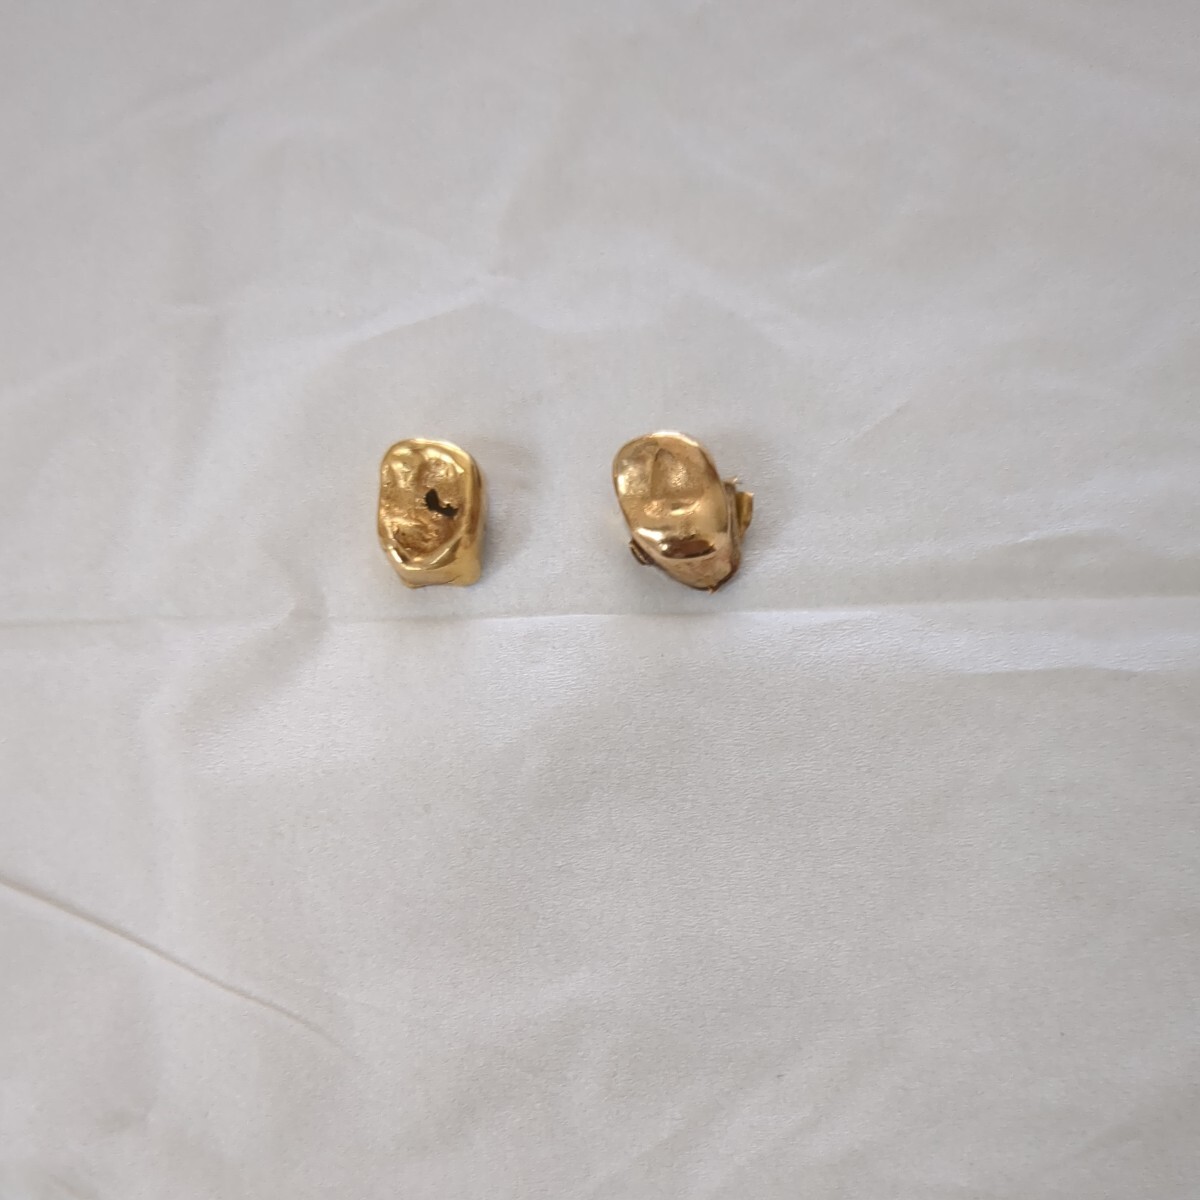  gold tooth 2.1 gram Gold 